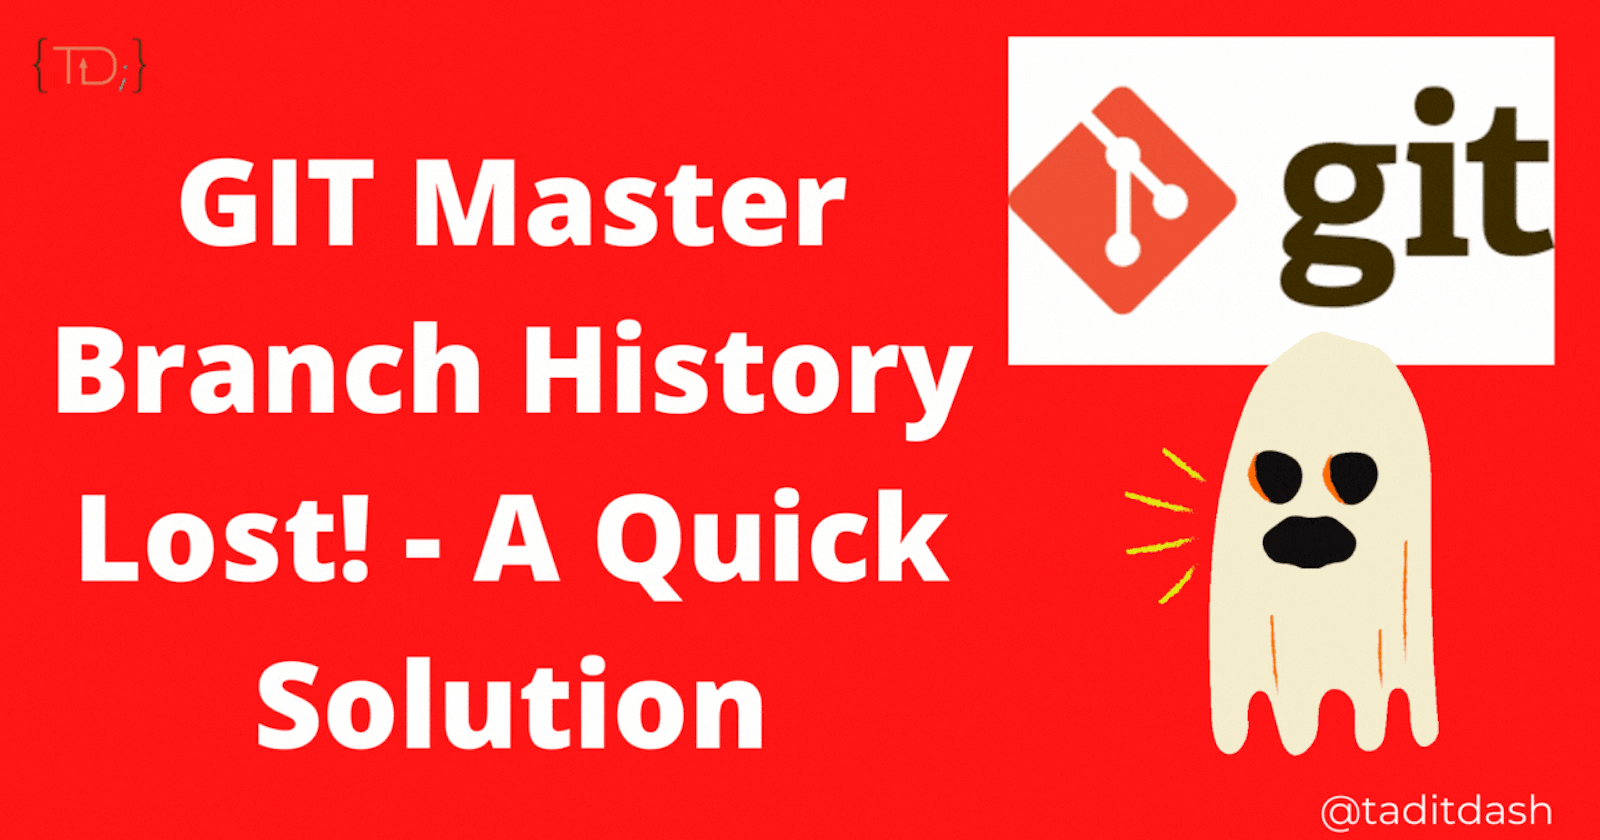 GIT Master Branch History Lost! - A Quick Solution